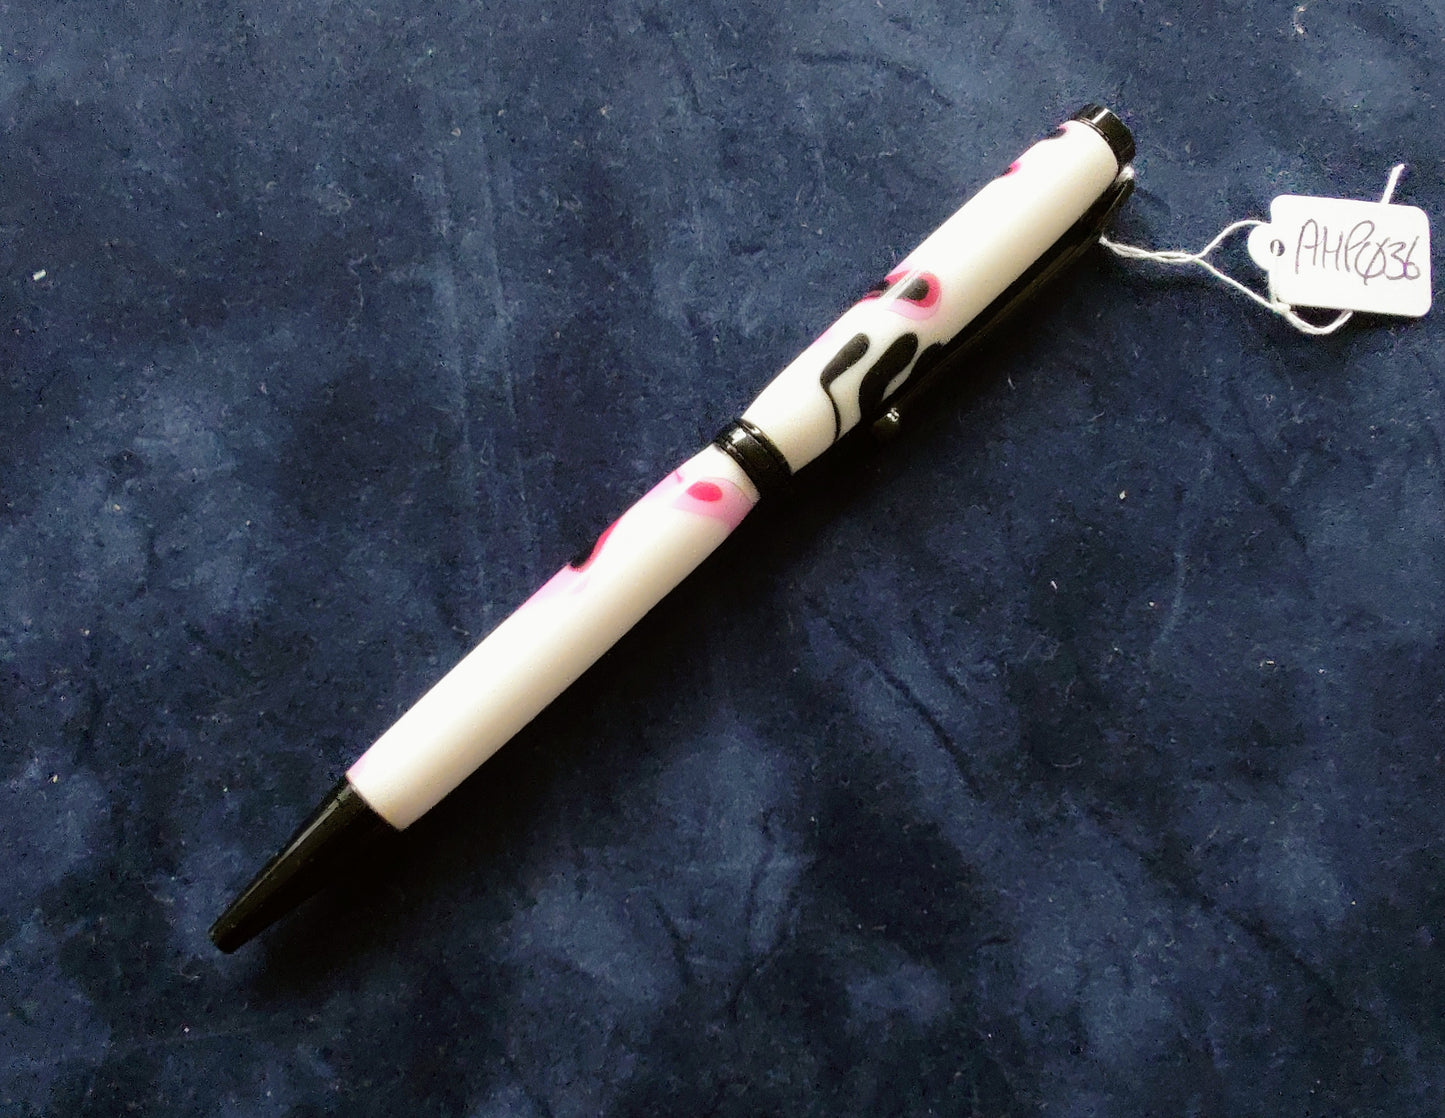 Andy Harris- White, Black and Pink Luxury Pen